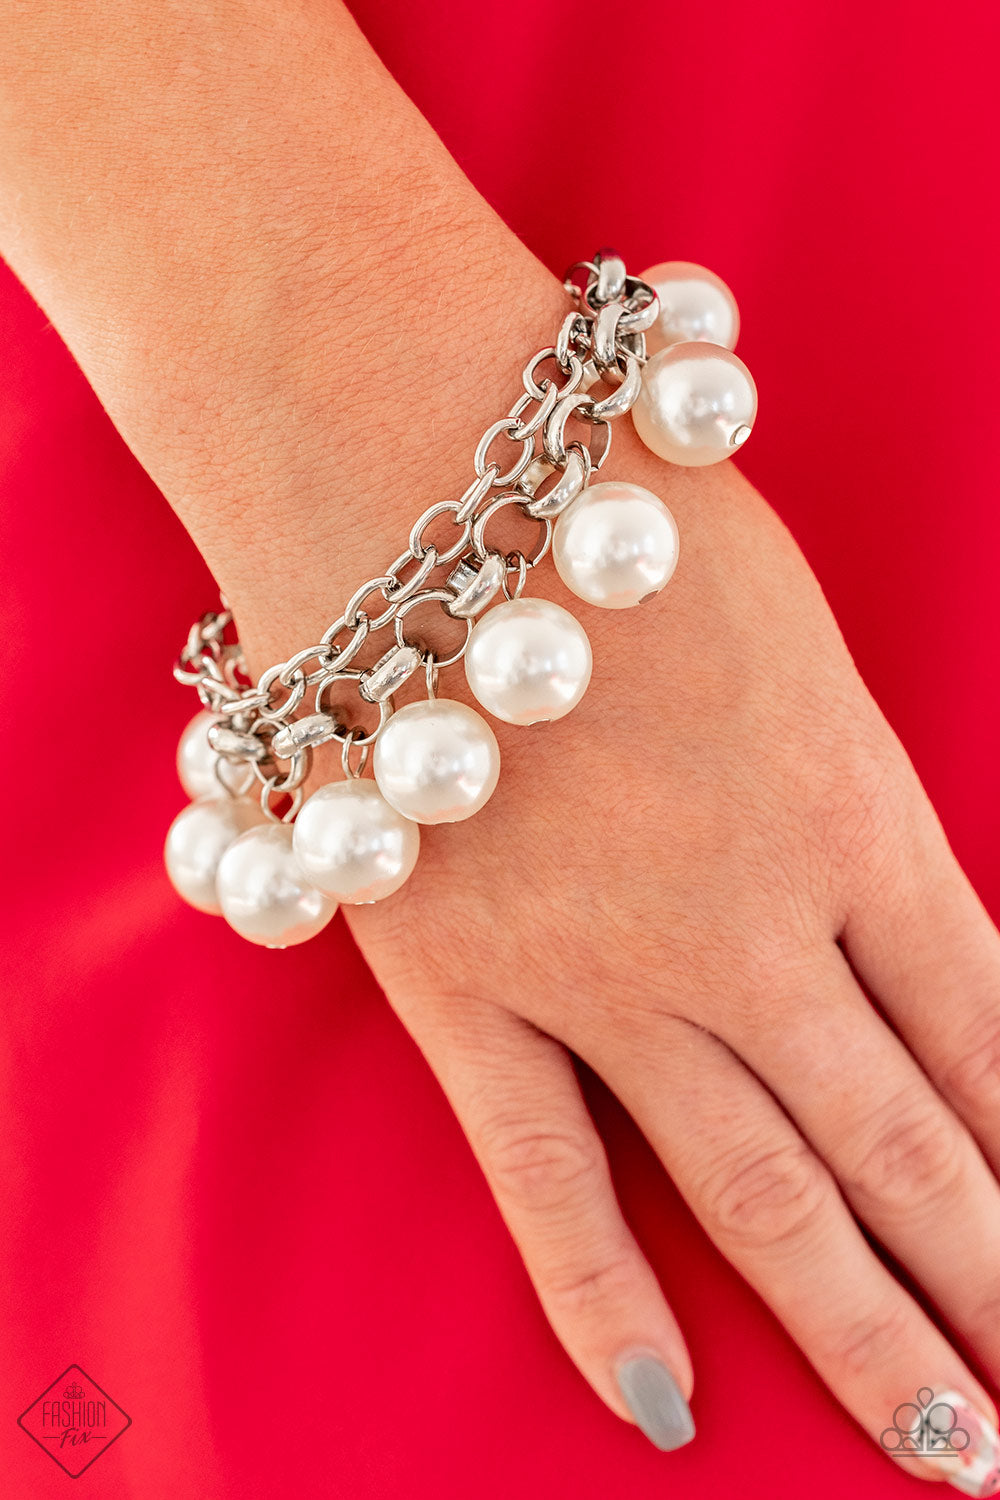 Paparazzi Word On Wall Street White Pearls - Silver Chain Bracelet - Fashion Fix Exclusive September 2019 - $5 Jewelry With Ashley Swint